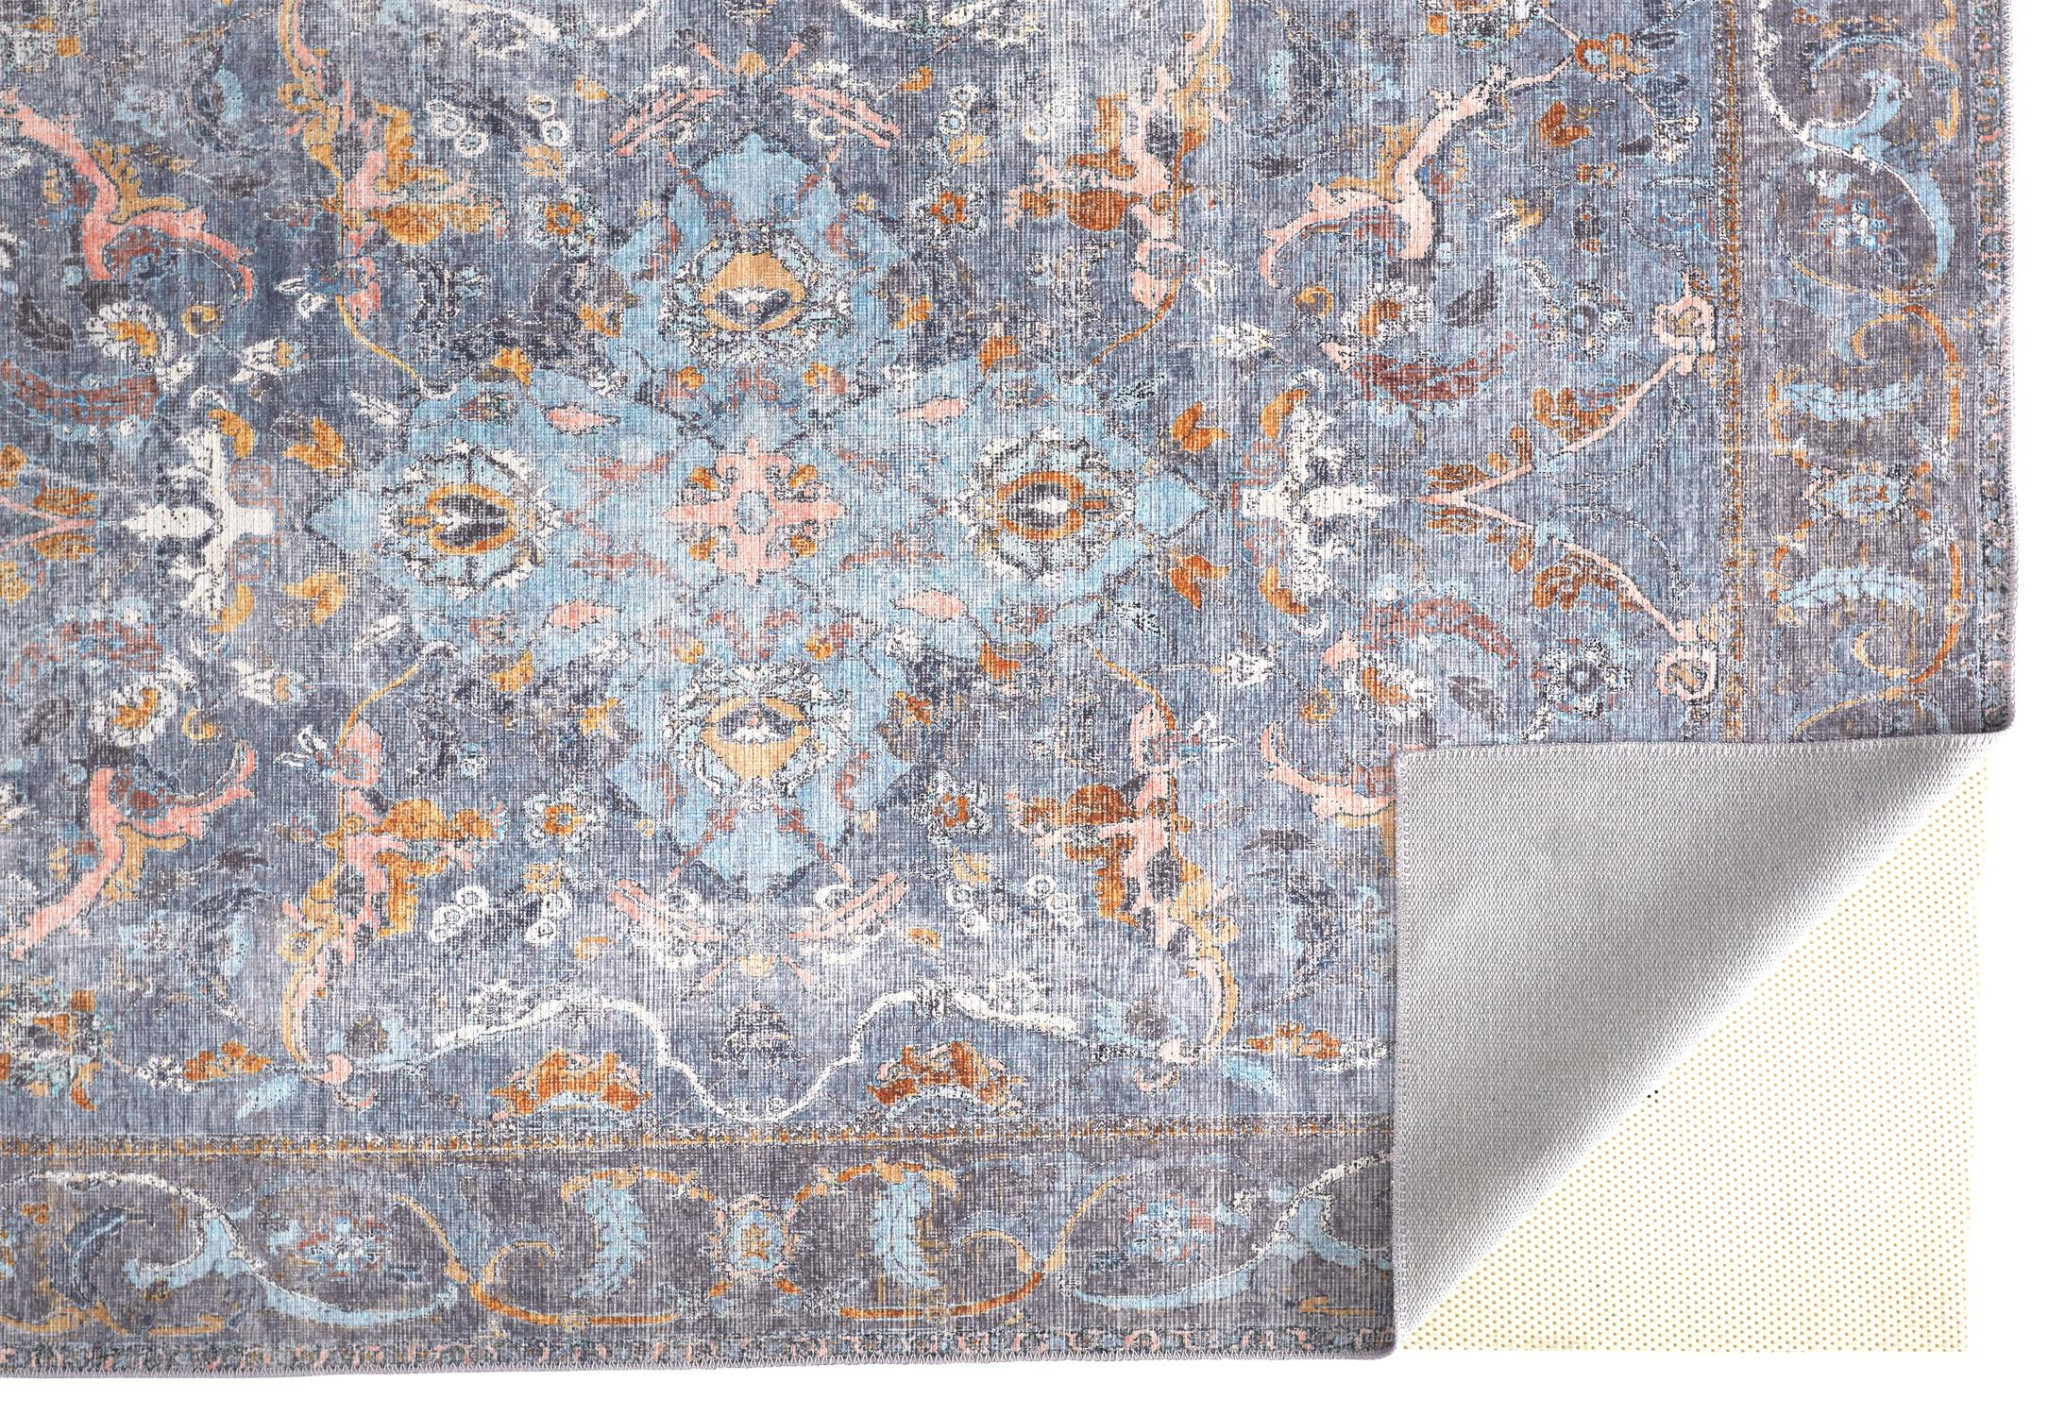 9' X 12' Blue Gray And Orange Floral Area Rug-515054-1